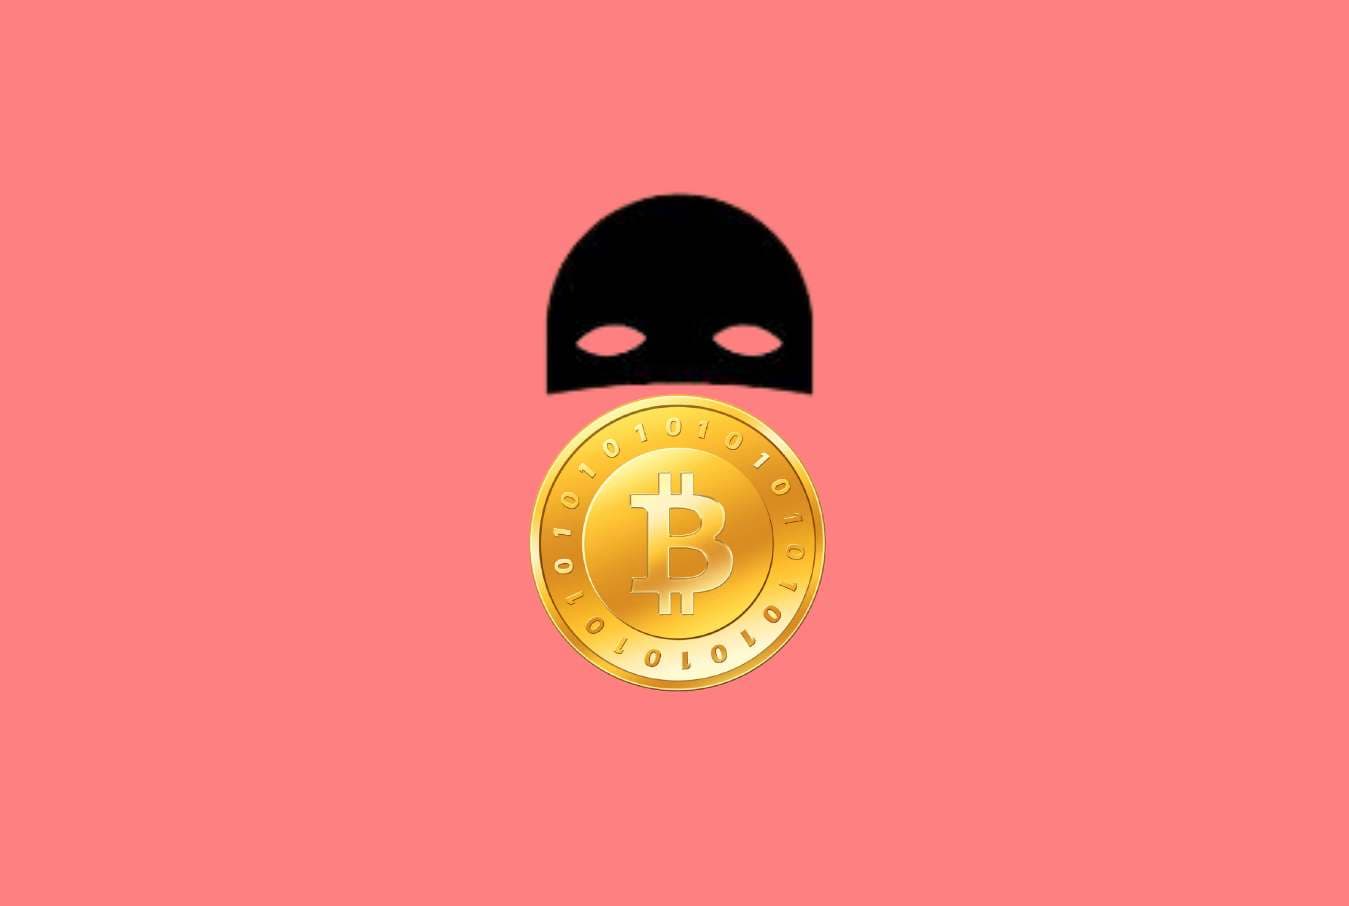 Hackers steal $600 million in largest ever cryptocurrency heist